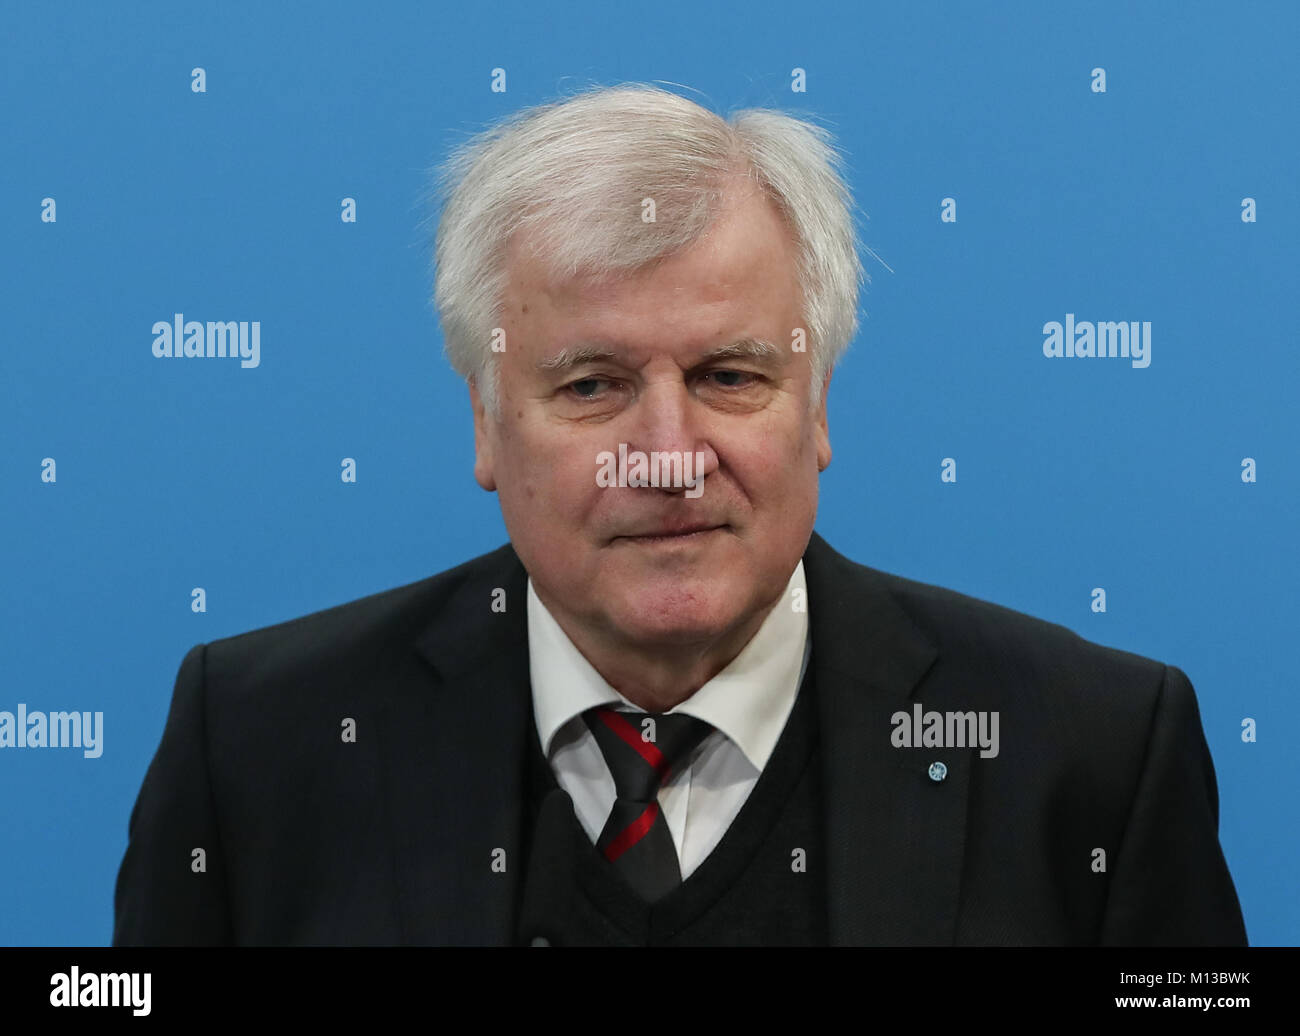 Berlin, Germany. 26th Jan, 2018. Leader of German Christian Social Union (CSU) Horst Seehofer delivers a speech before the start of coalition talks at the Christian Democratic Union (CDU) party headquarters in Berlin, capital of Germany, on Jan. 26, 2018. Credit: Shan Yuqi/Xinhua/Alamy Live News Stock Photo